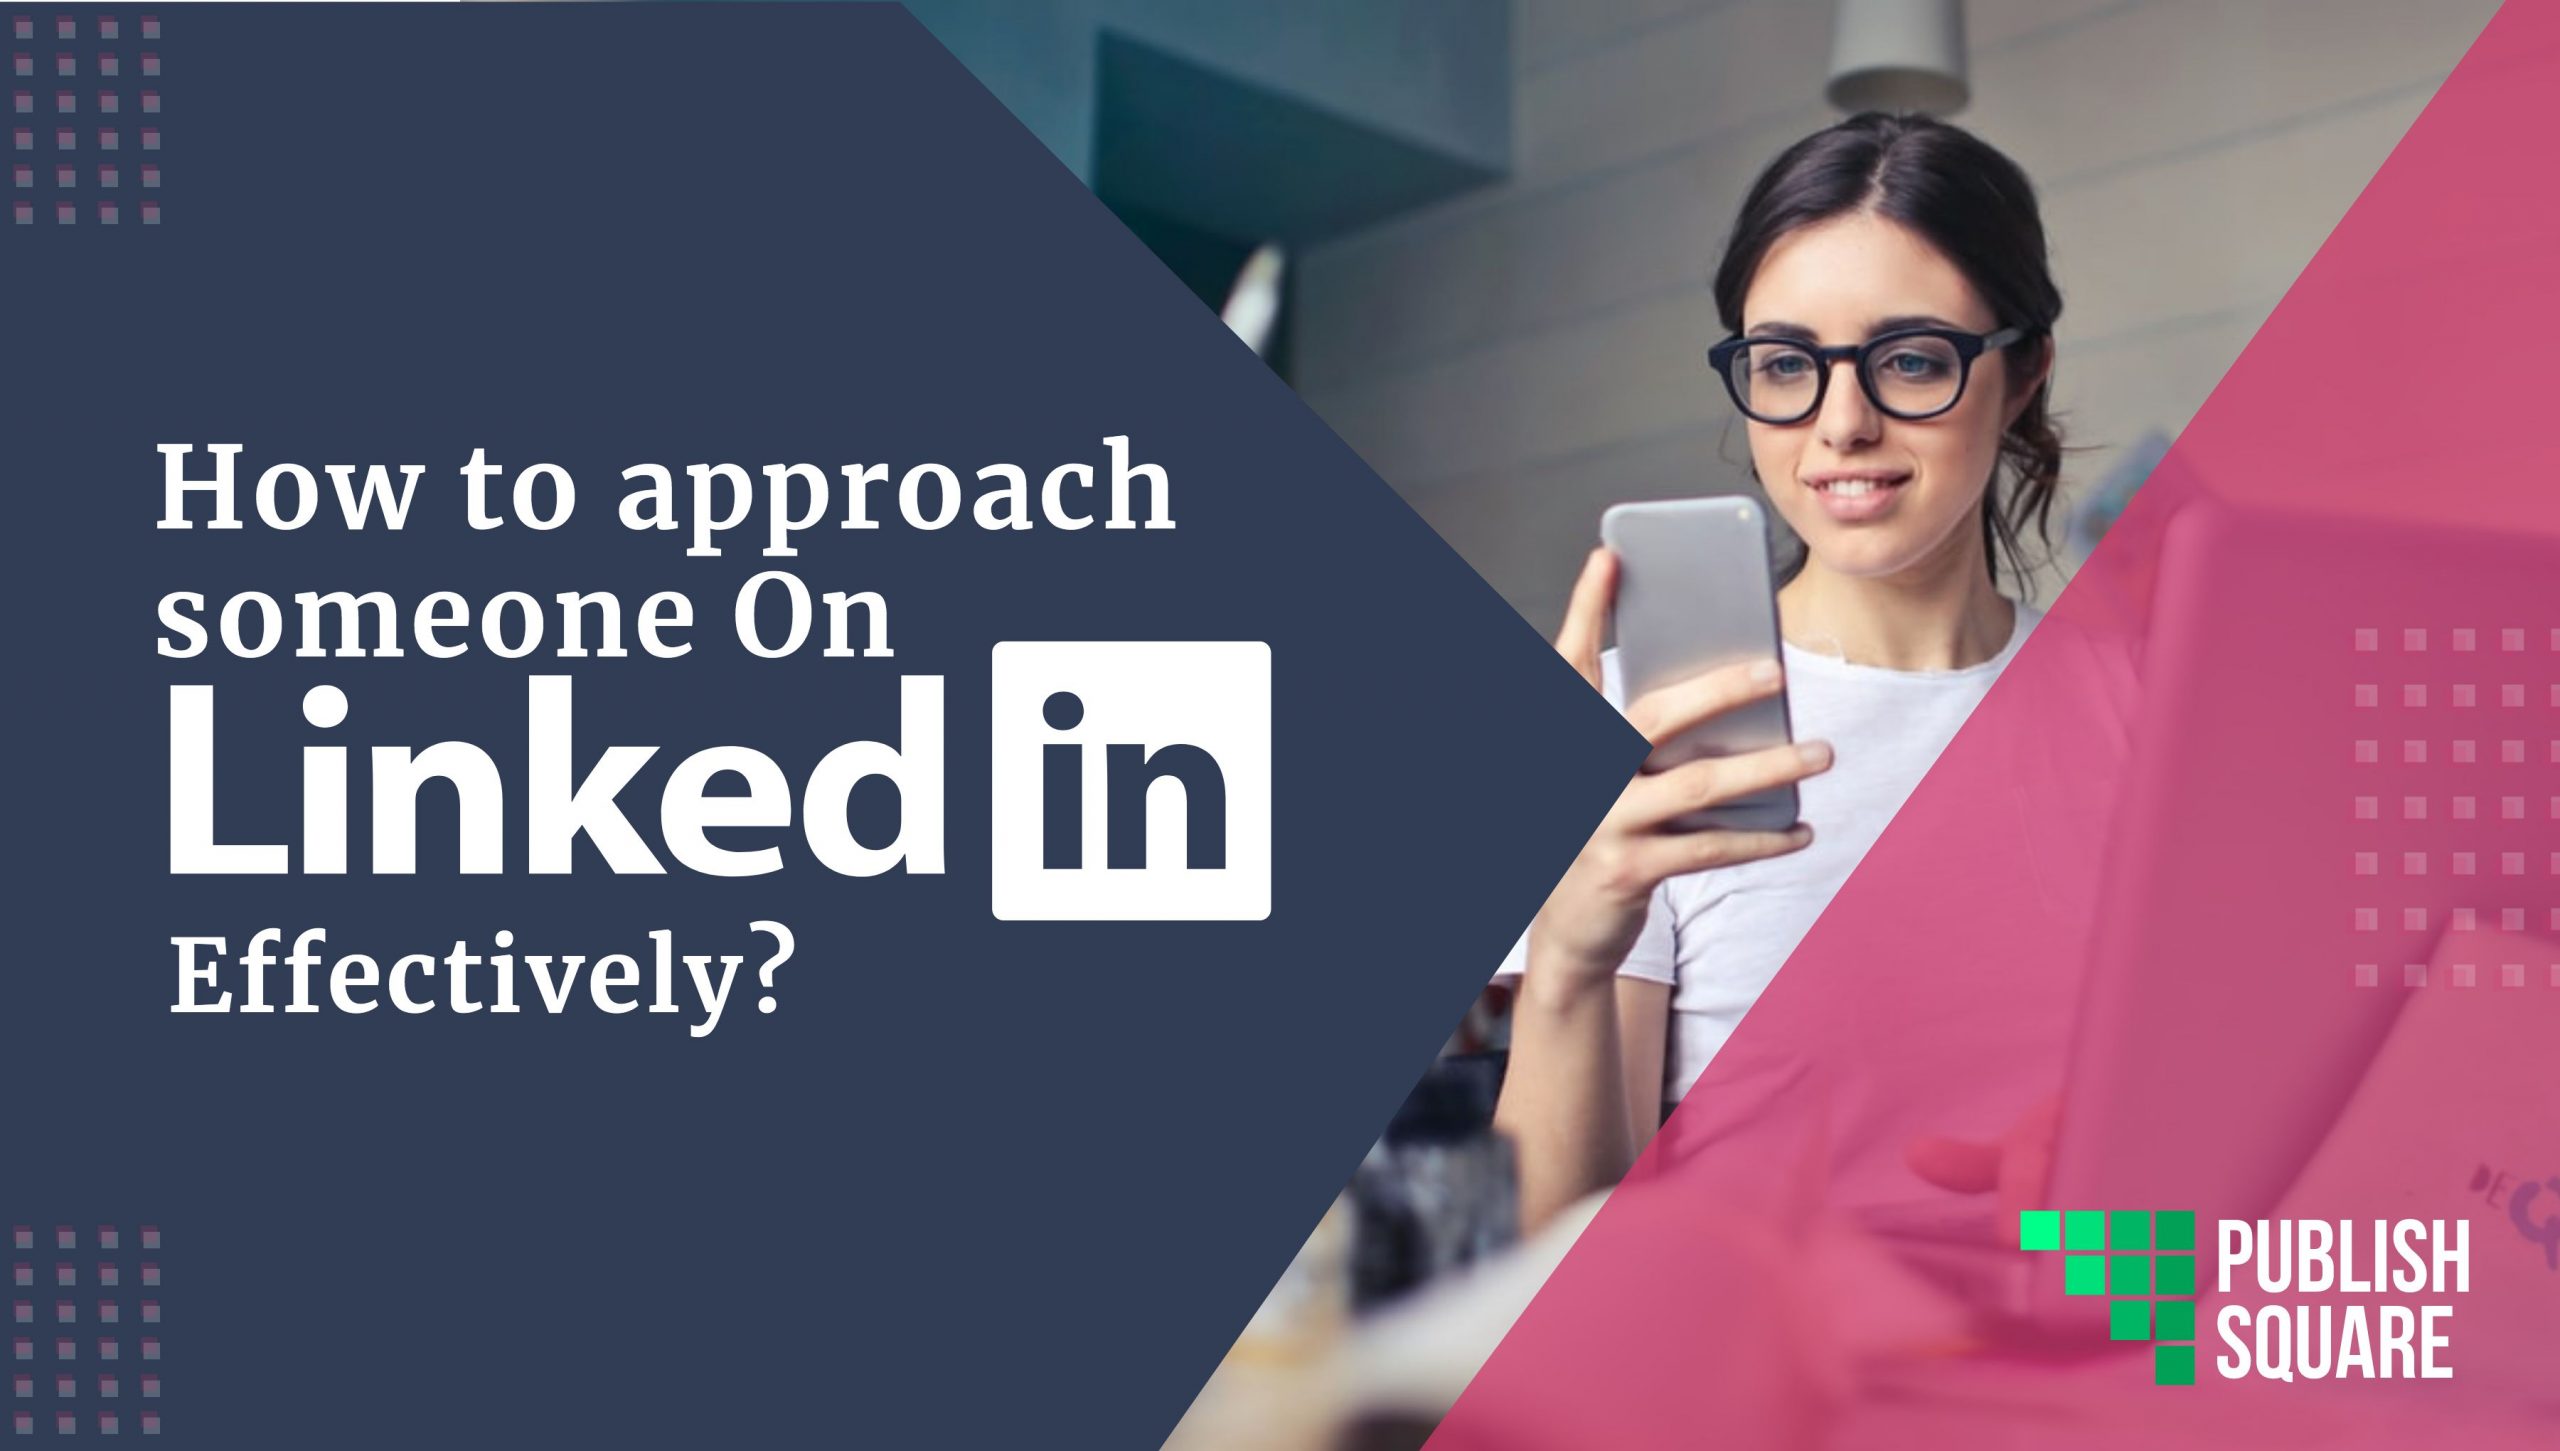 How to approach someone on LinkedIn Effectively?